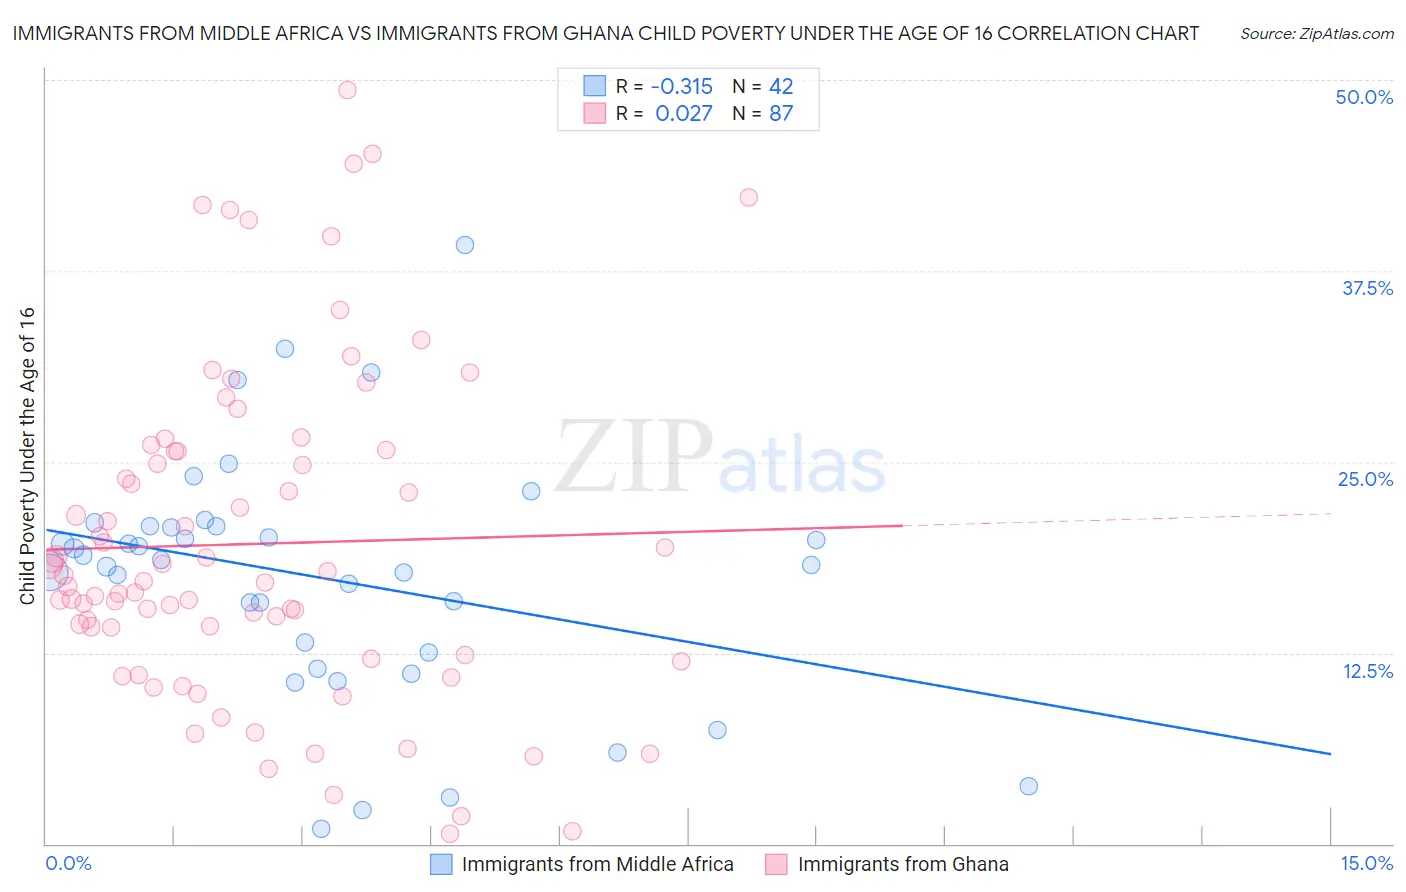 Immigrants from Middle Africa vs Immigrants from Ghana Child Poverty Under the Age of 16